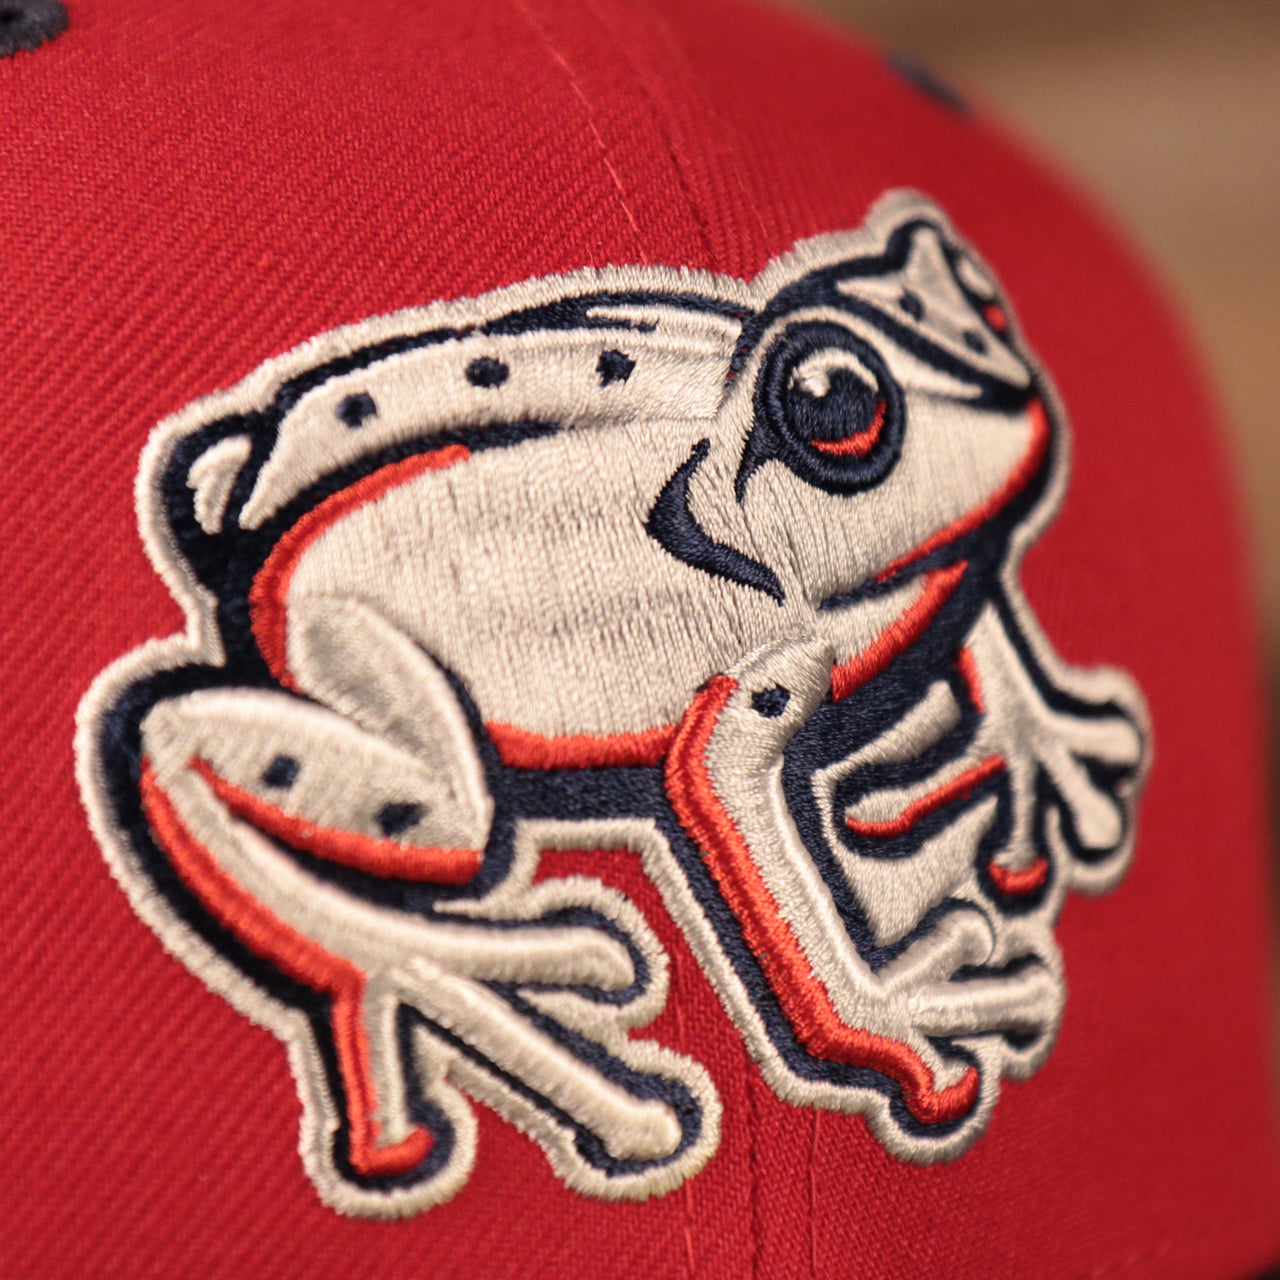 The white coquis frog logo on the front of the red coqui fitted cap for the MiLB Copa.